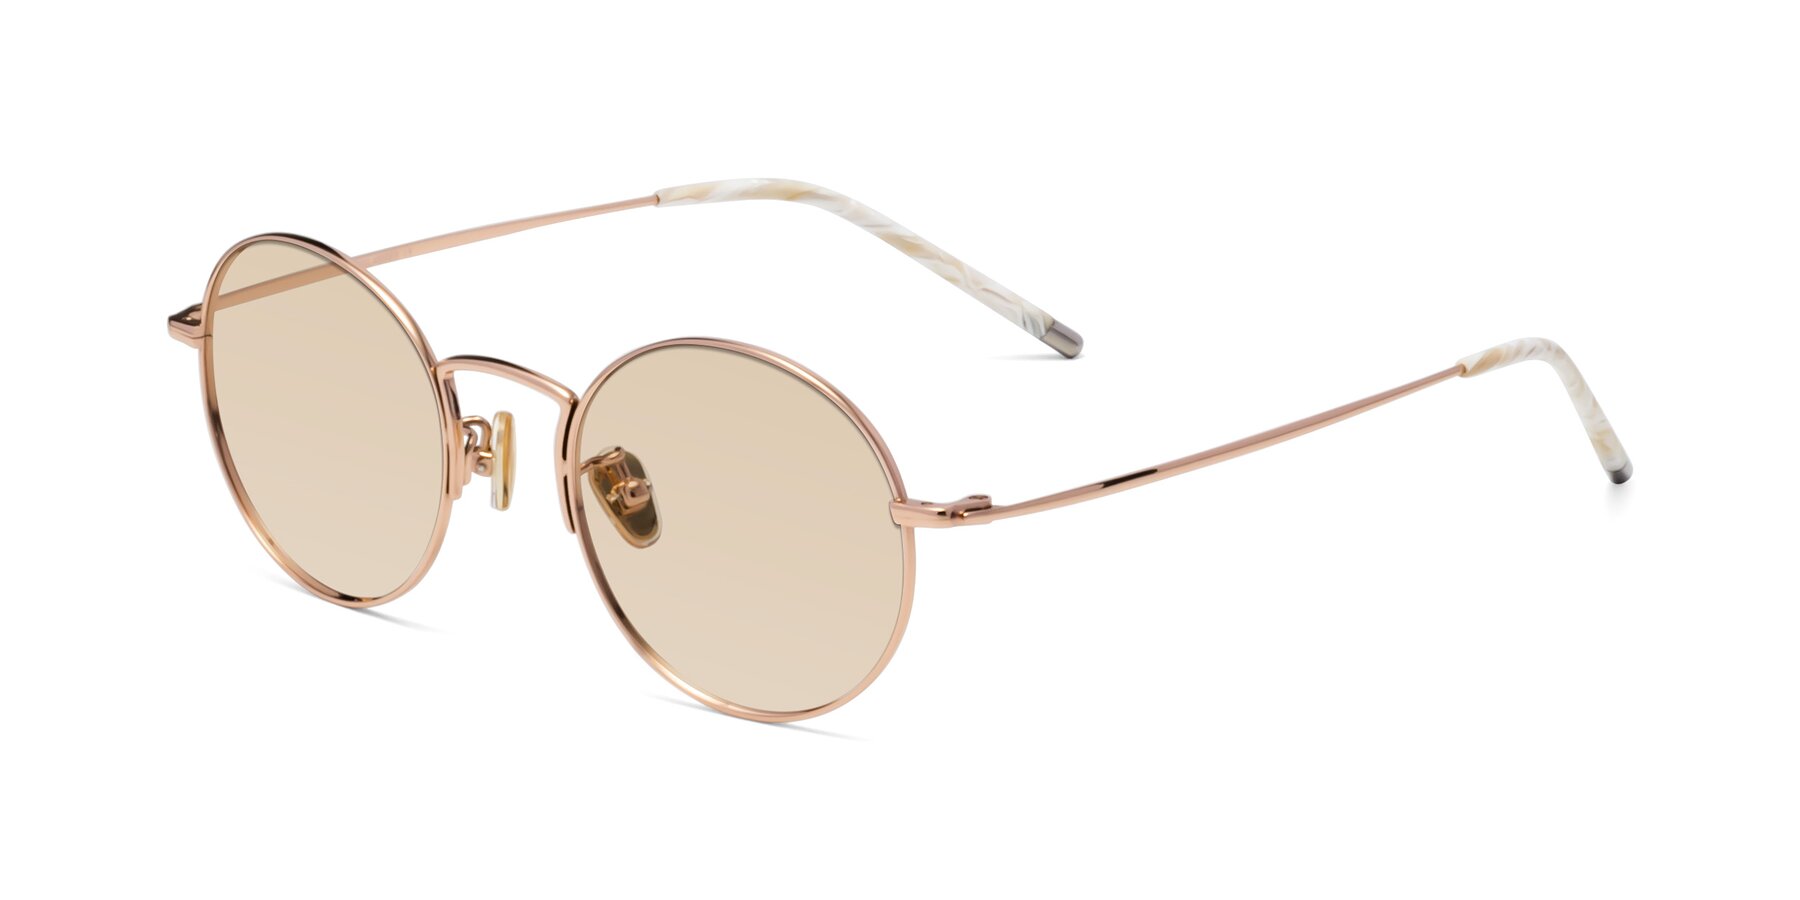 Angle of 80033 in Rose Gold with Light Brown Tinted Lenses